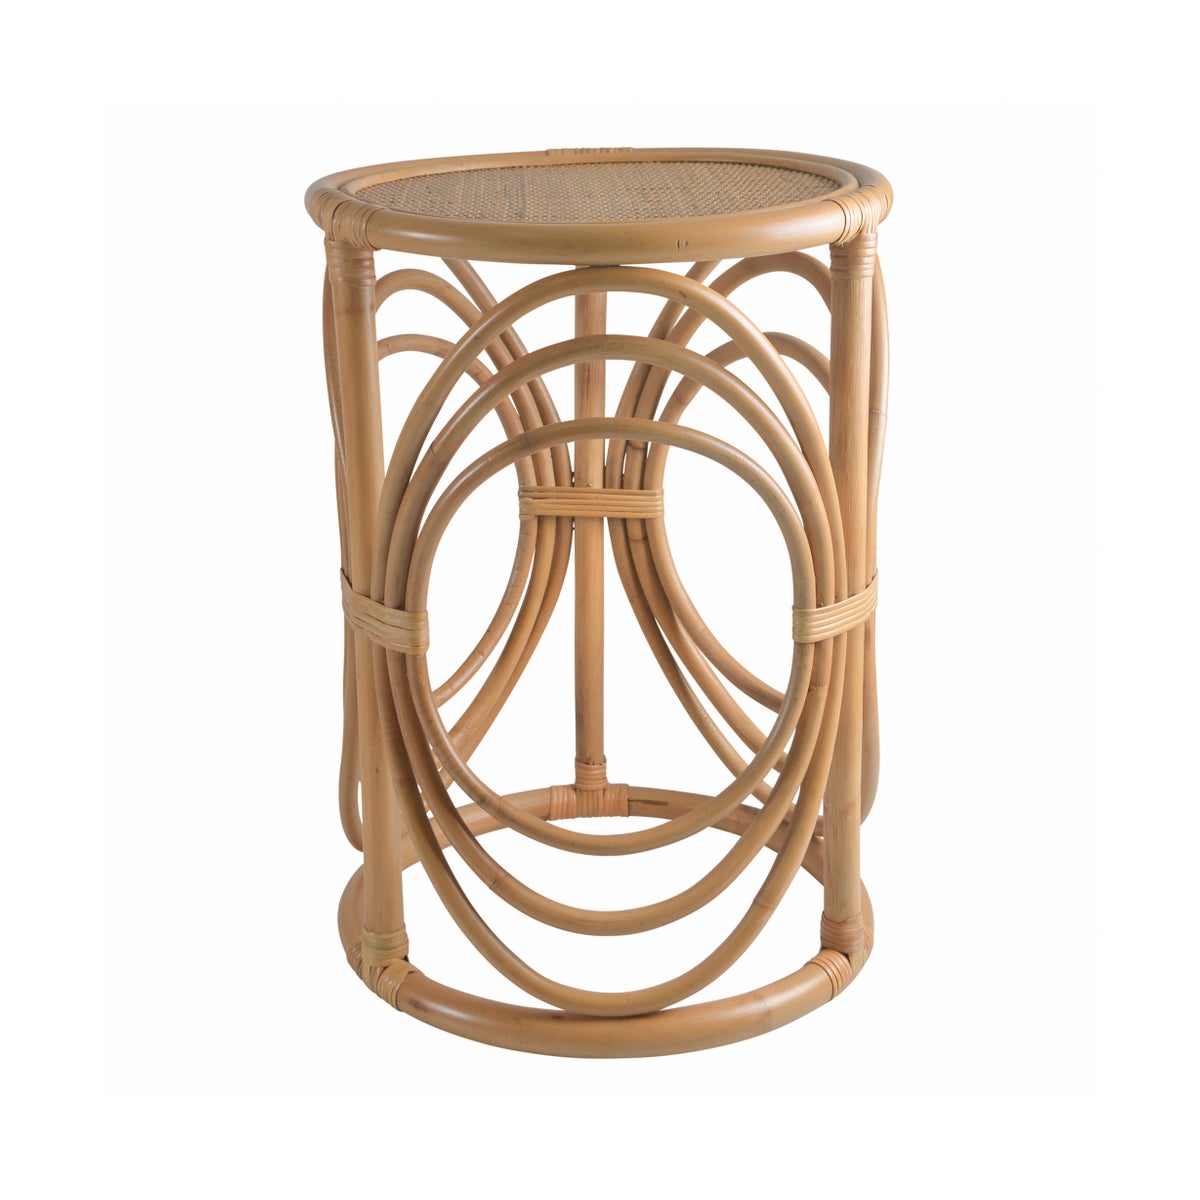 Edith Side Table in Natural